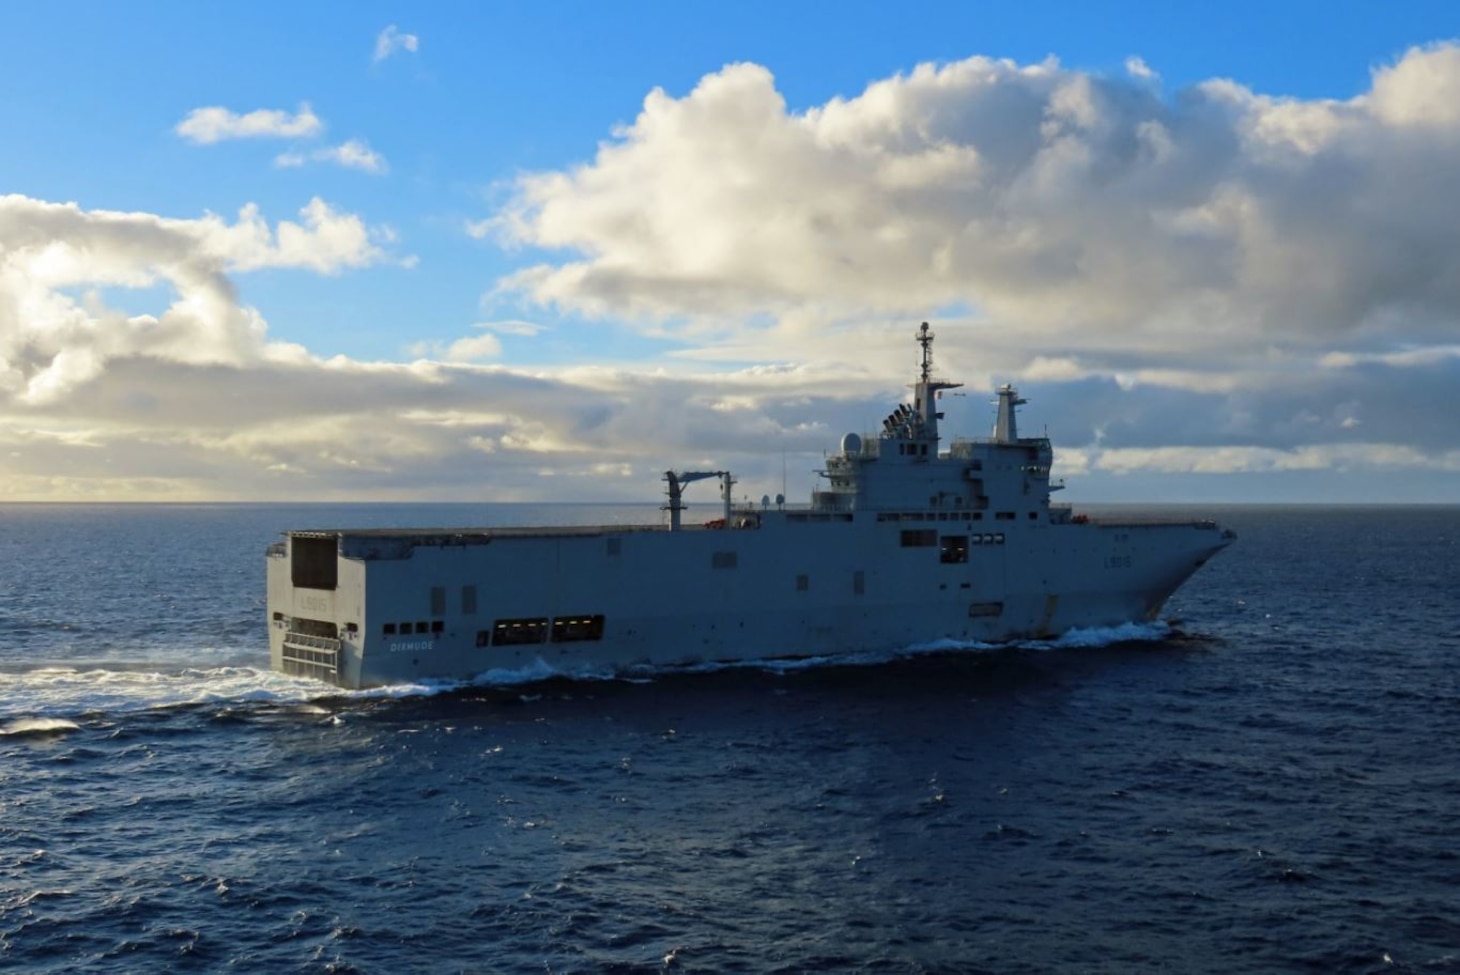 French Navy LHD Dixmude (L9015) sails off after completing a replenishment-at-sea by U.S. Navy’s Military Sealift Command USNS Laramie (T-AO 203) in the Atlantic Ocean, Dec. 10.